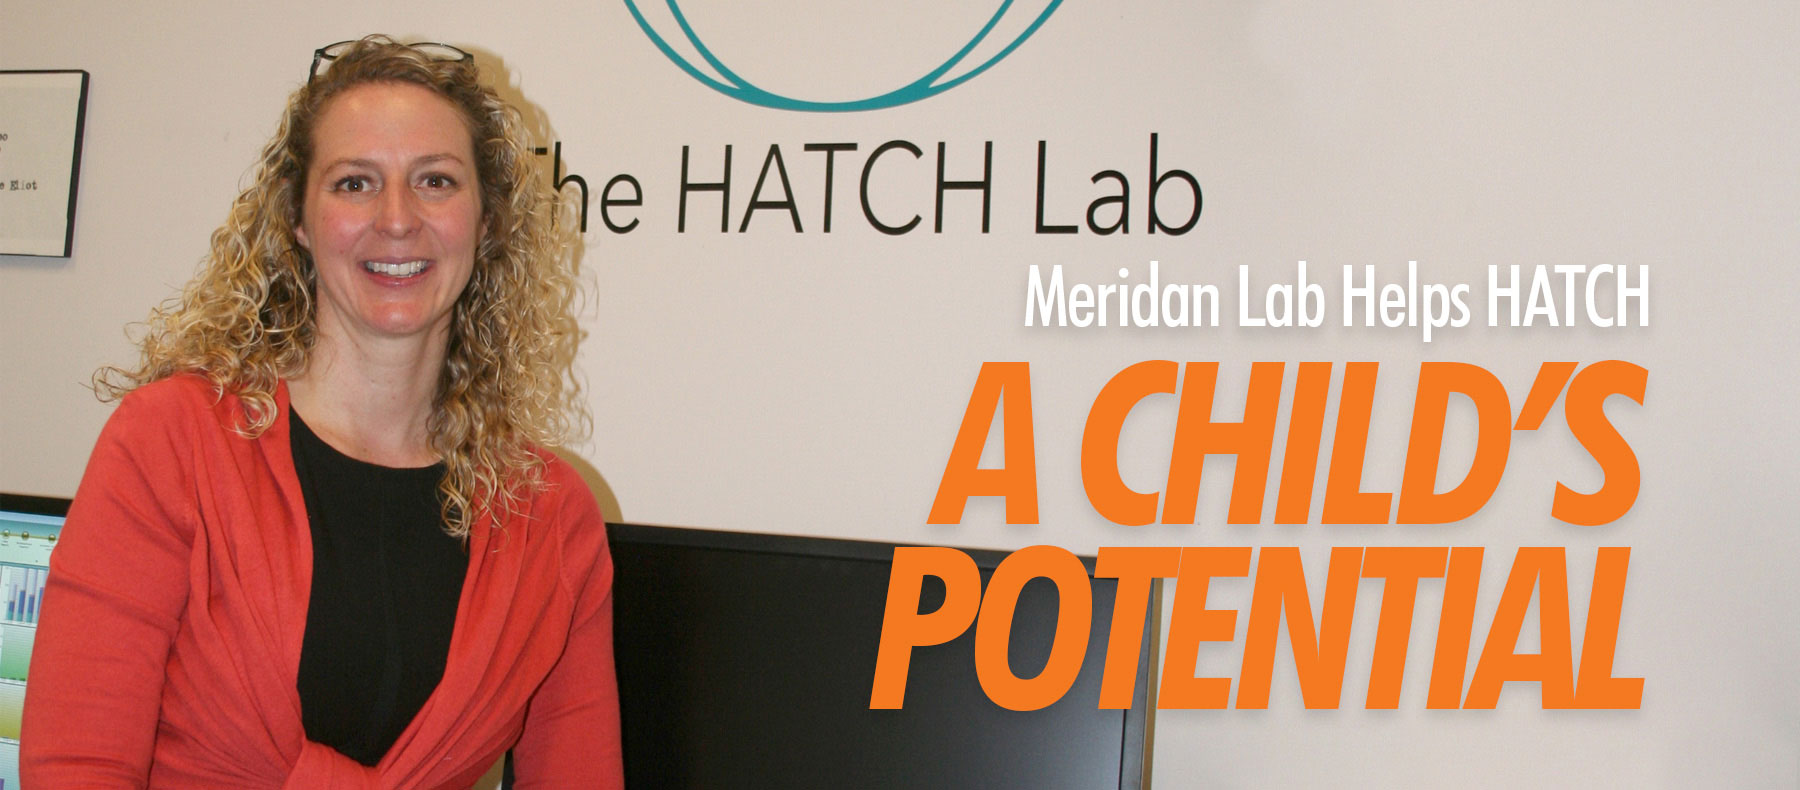 Meridian Lab helps HATCH a child's potential